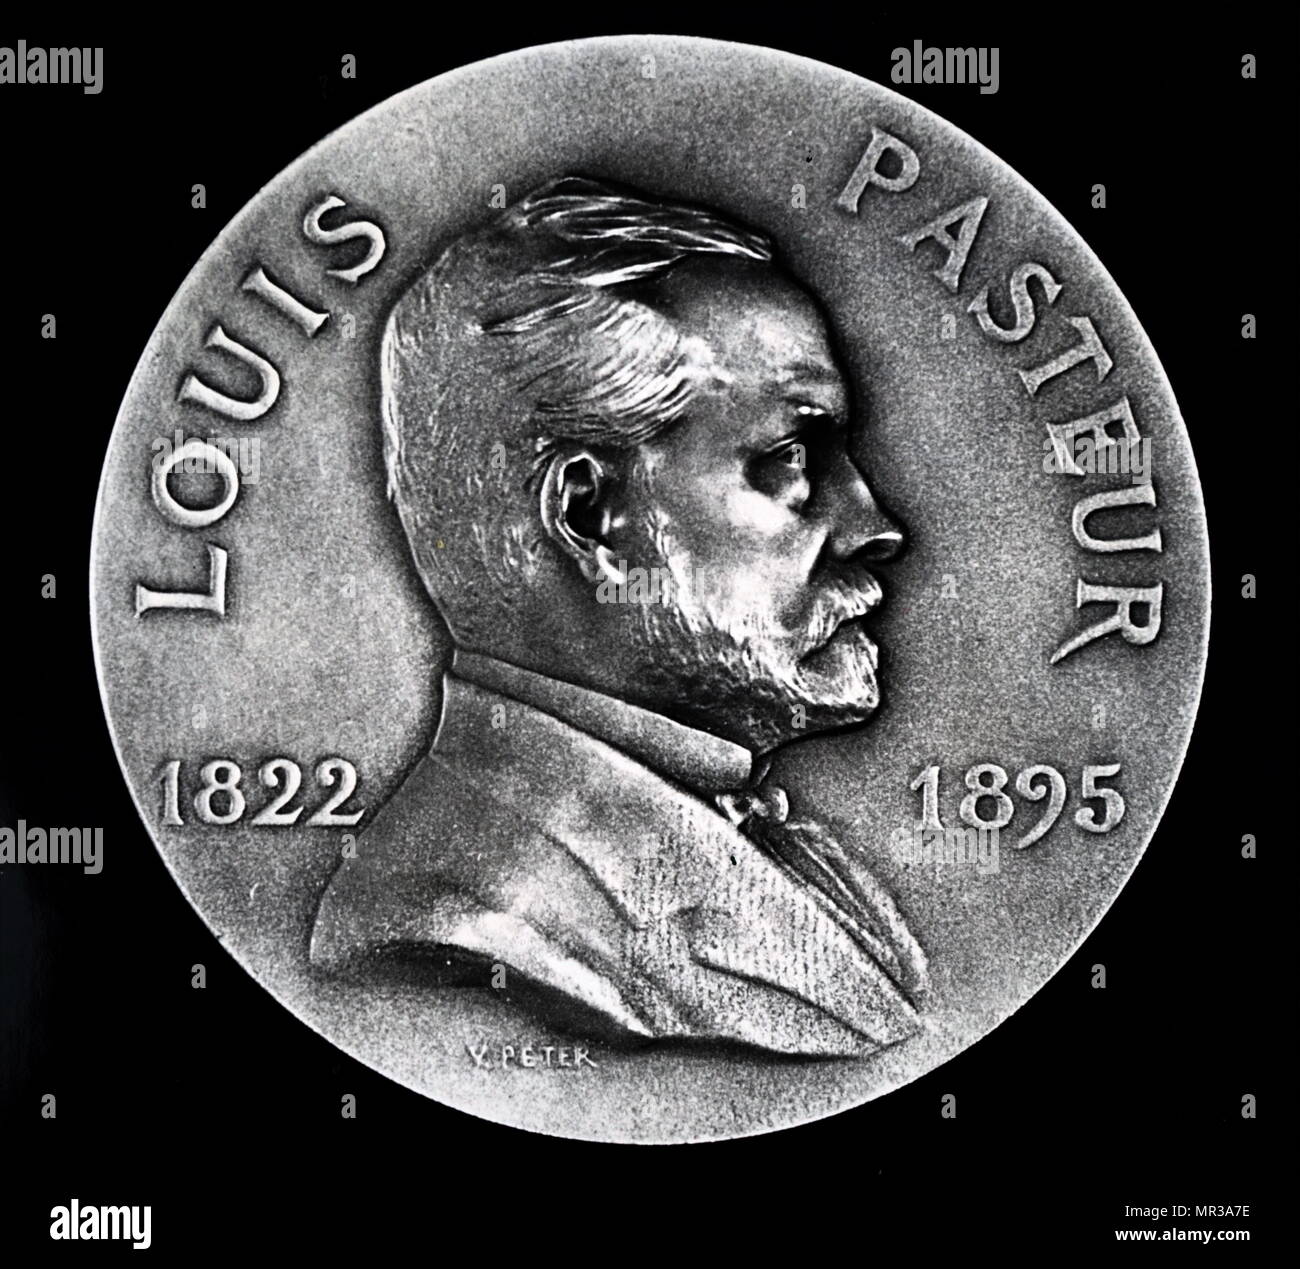 Commemorative medal depicting Louis Pasteur (1822-1895) a French biologist, microbiologist and chemist renowned for his discoveries of the principles of vaccination, microbial fermentation and pasteurisation. Dated 19th century Stock Photo